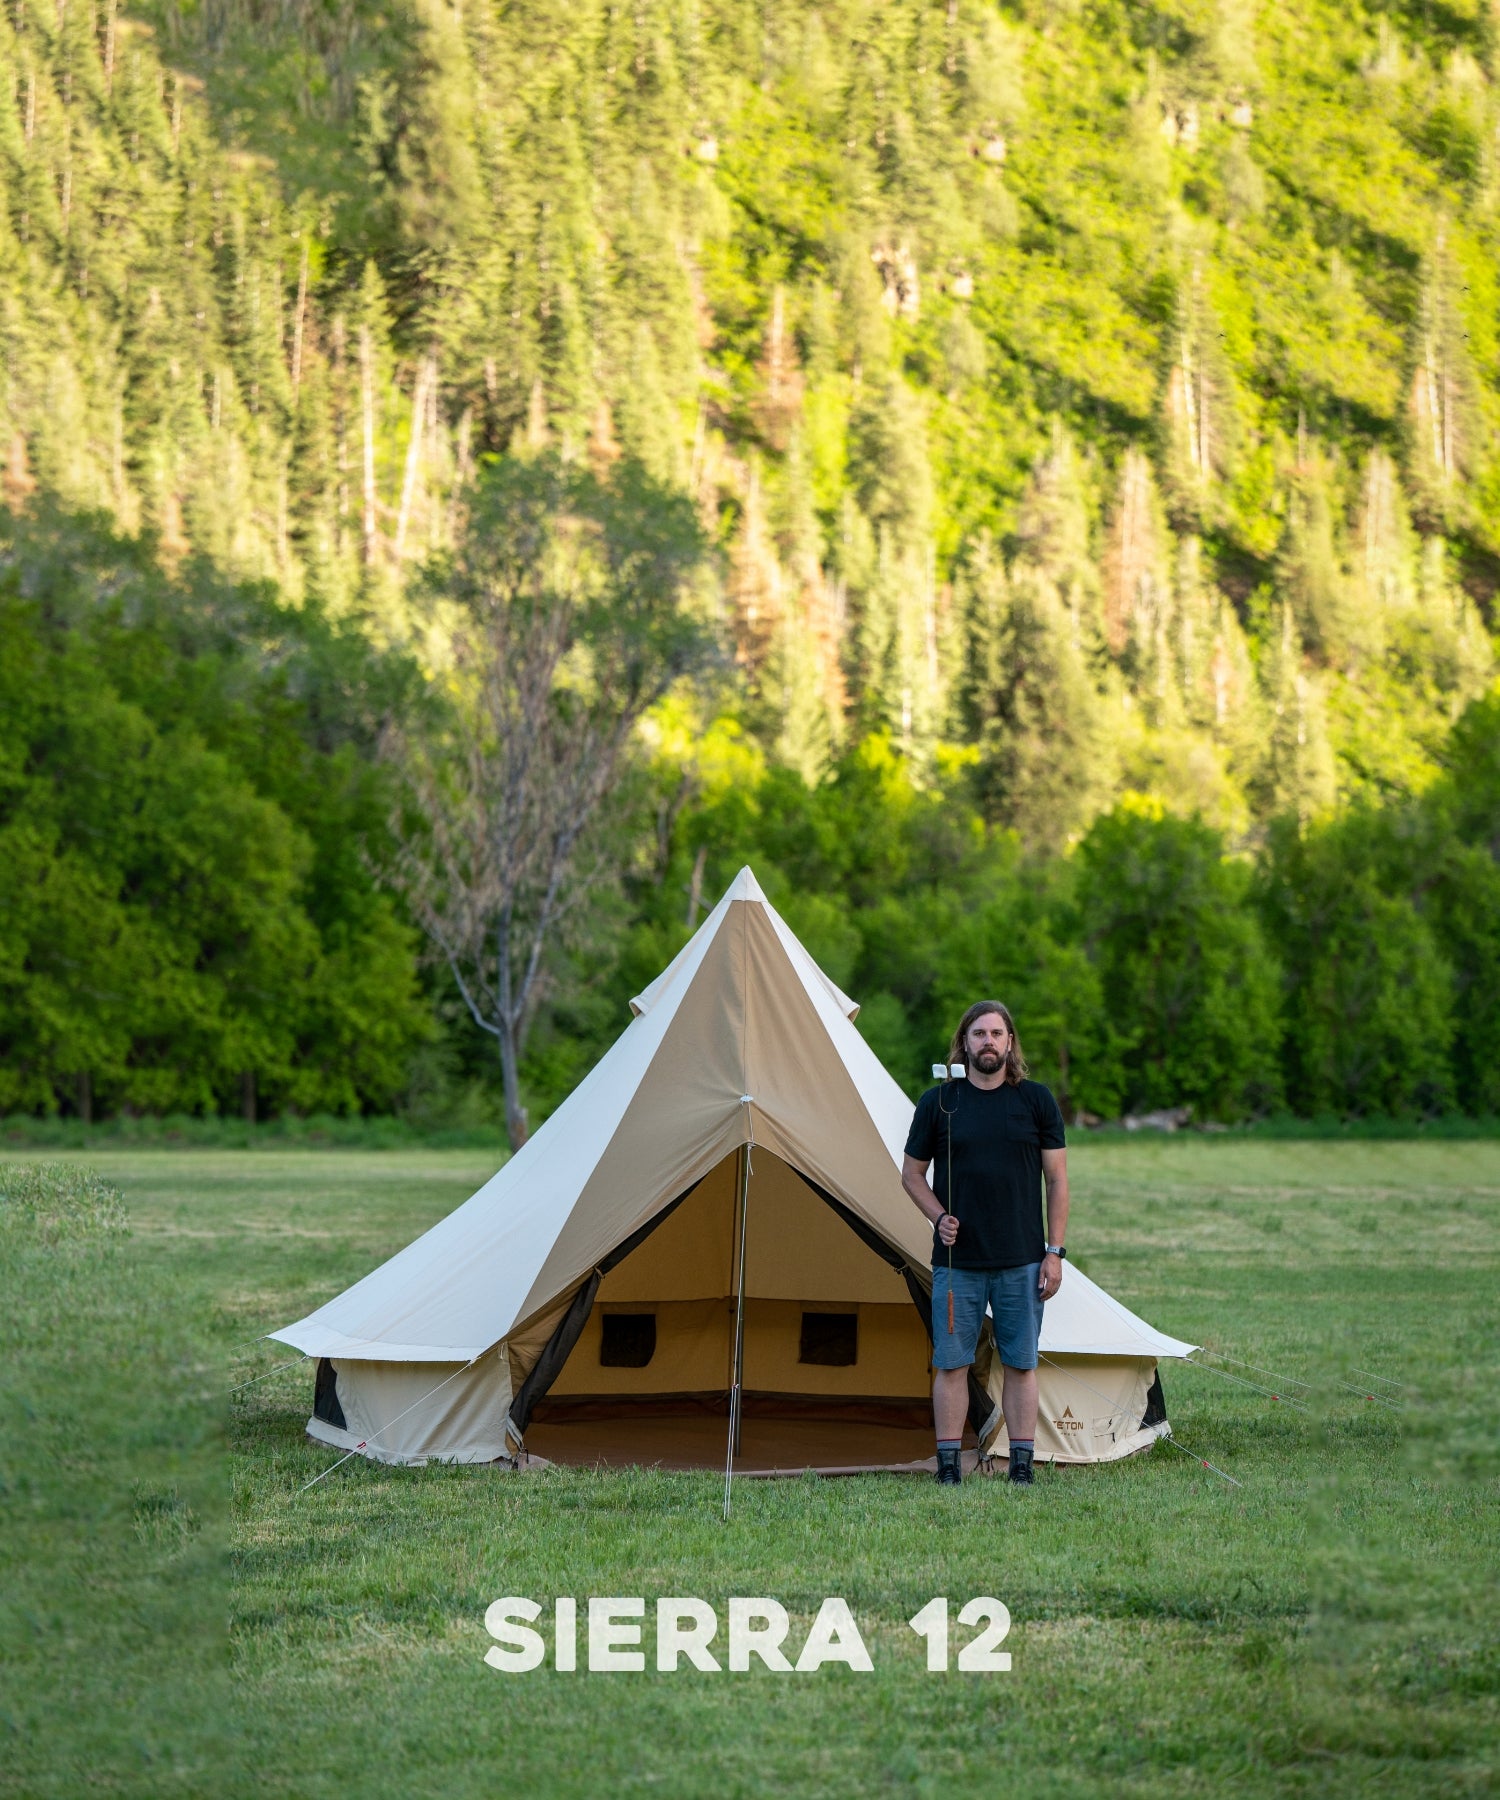 The TETON Sports Sierra 12' Canvas Tent: Image shows a man standing in front of the tent with a marshmallow stick to show comparative size.